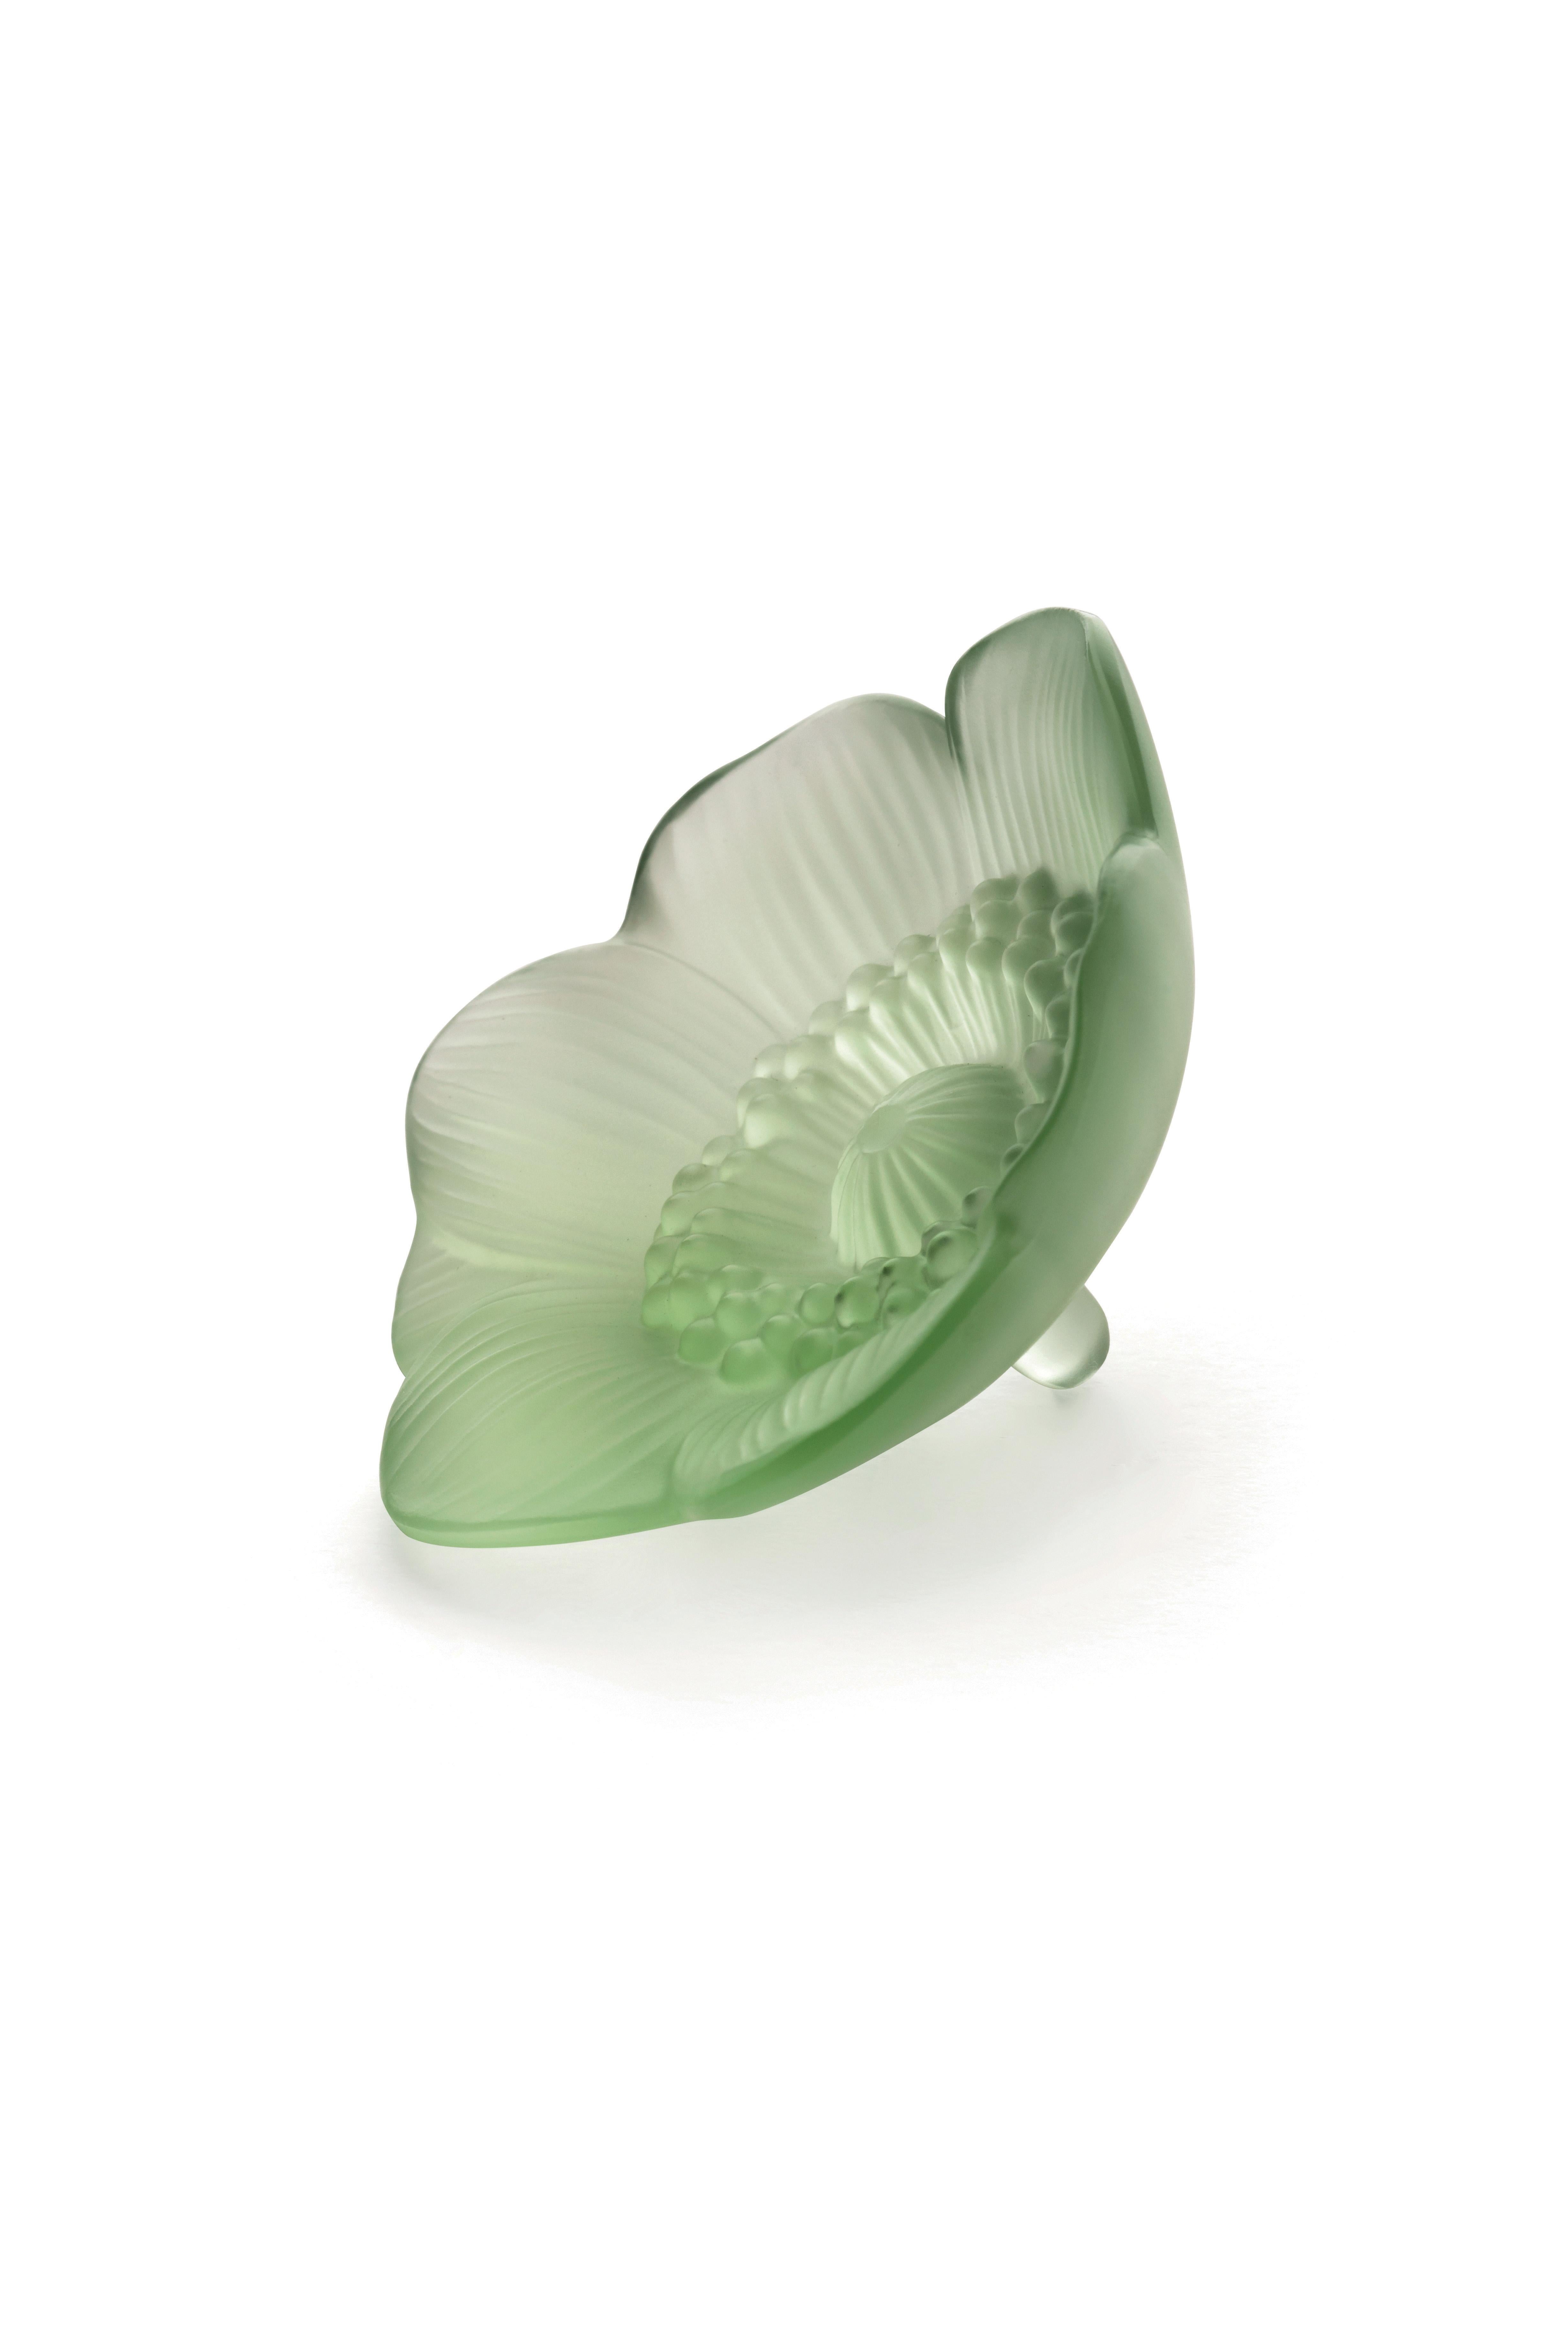 For Sale: Green (Lime Green) Small Anemone Flower Sculpture in Crystal Glass by Lalique